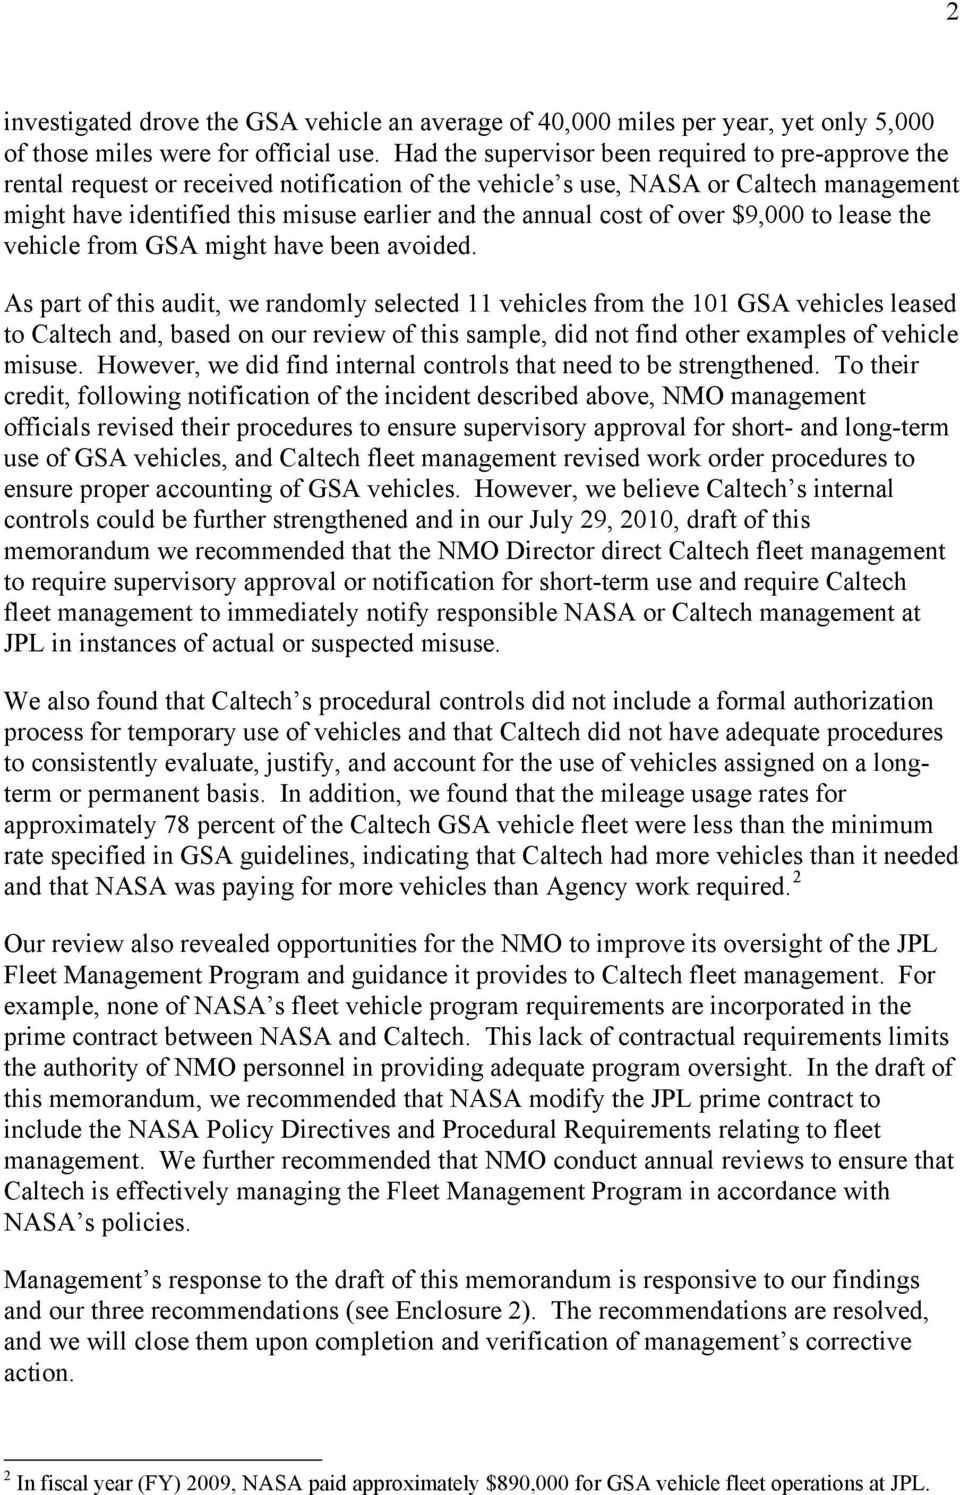 cost of over $9,000 to lease the vehicle from GSA might have been avoided.